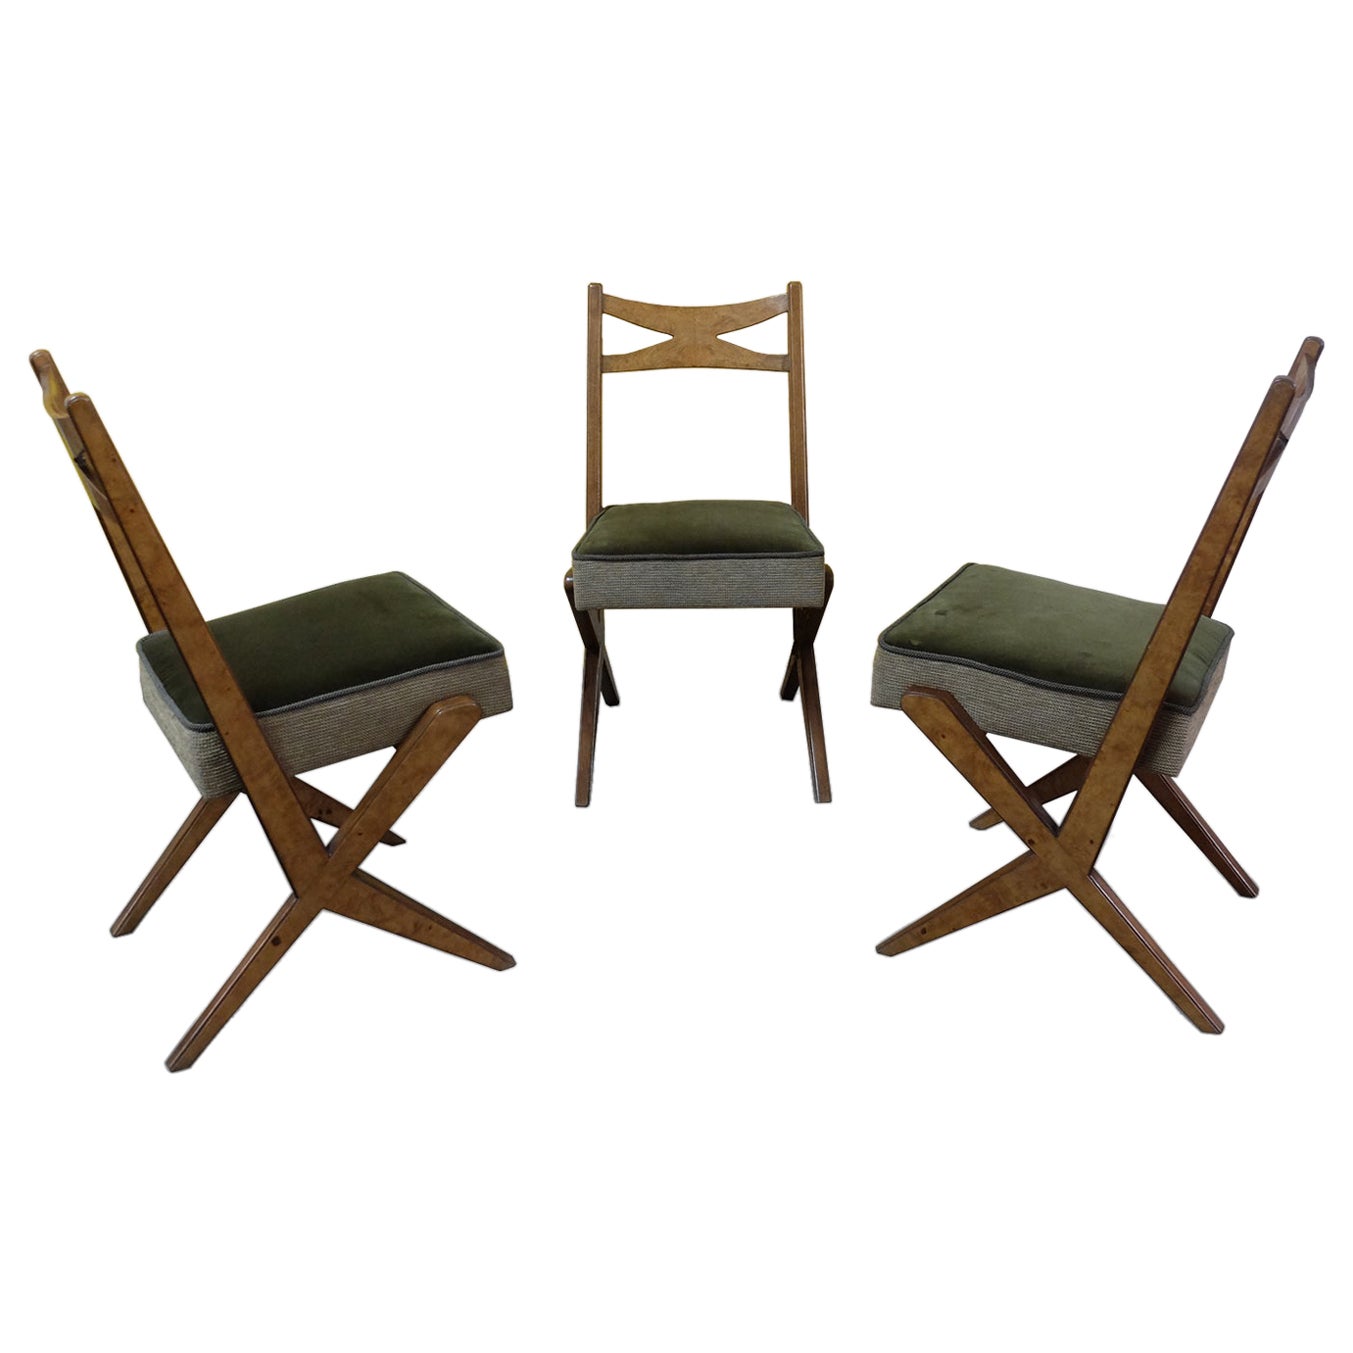 BBPR, rare set of 3 Italian Mid-century Modern Wooden and Velour Chairs, 1948